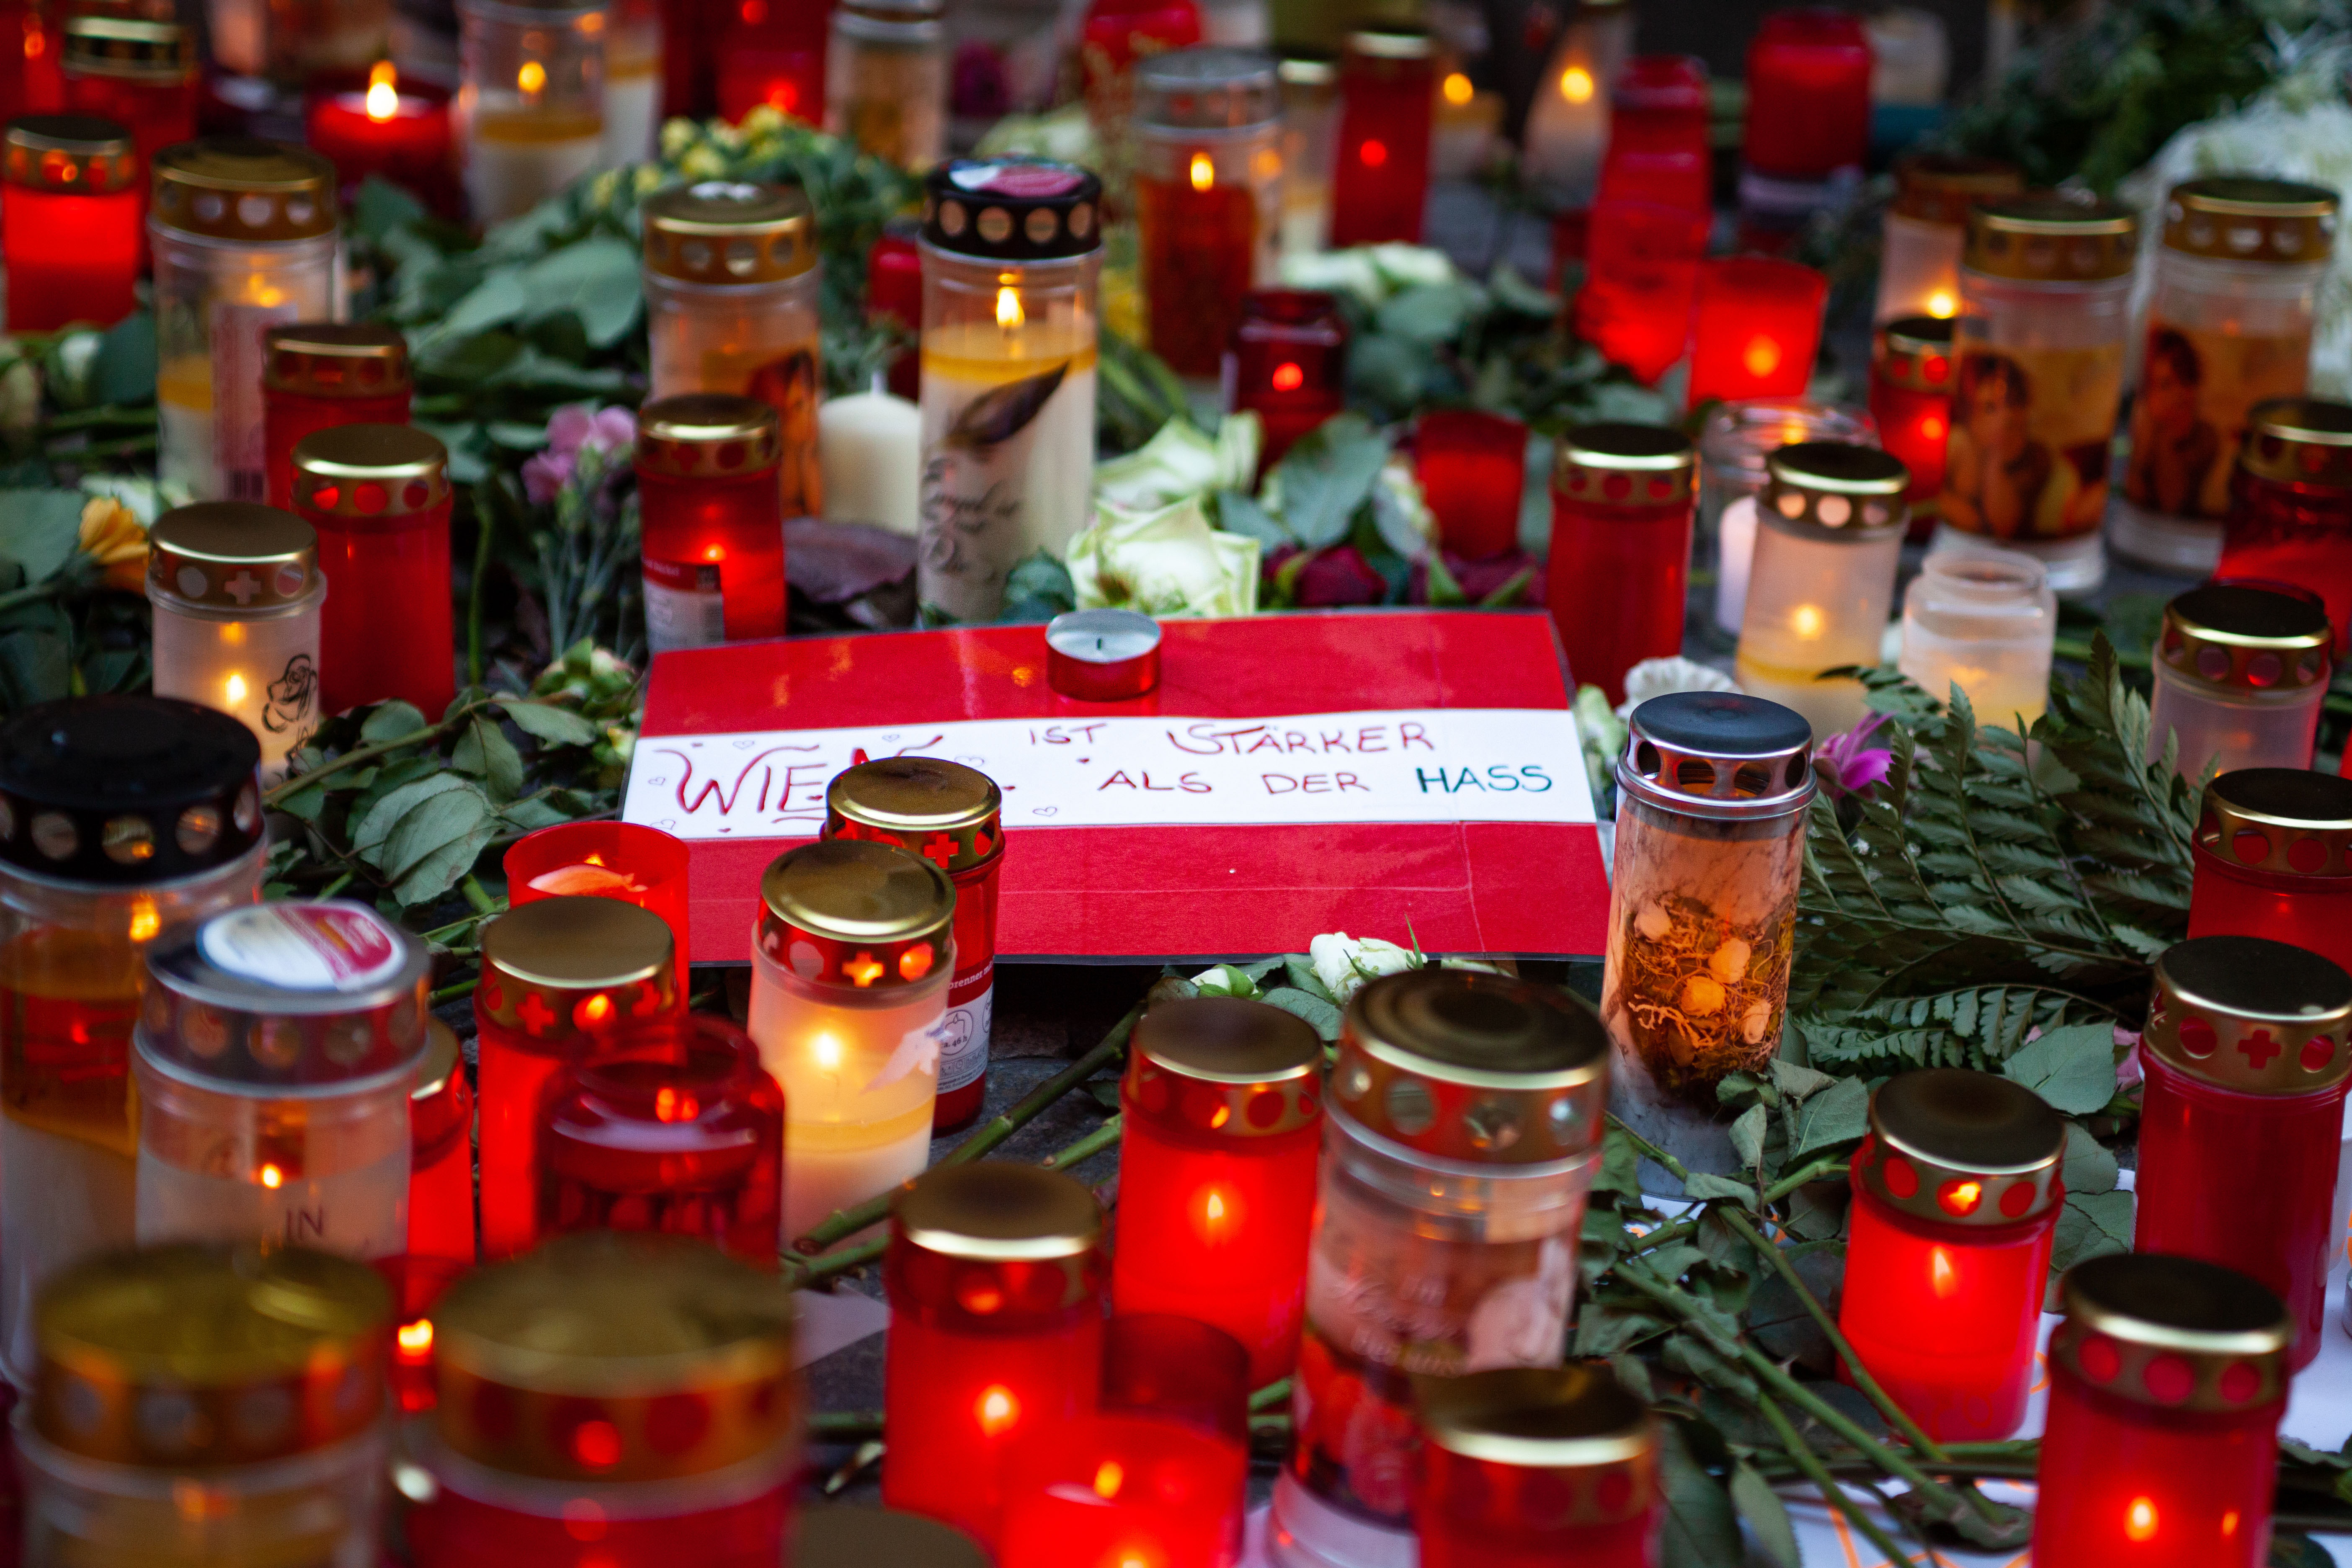 “Vienna is stronger than hate”: Community and Faith Leaders Stand United After Terror Attack